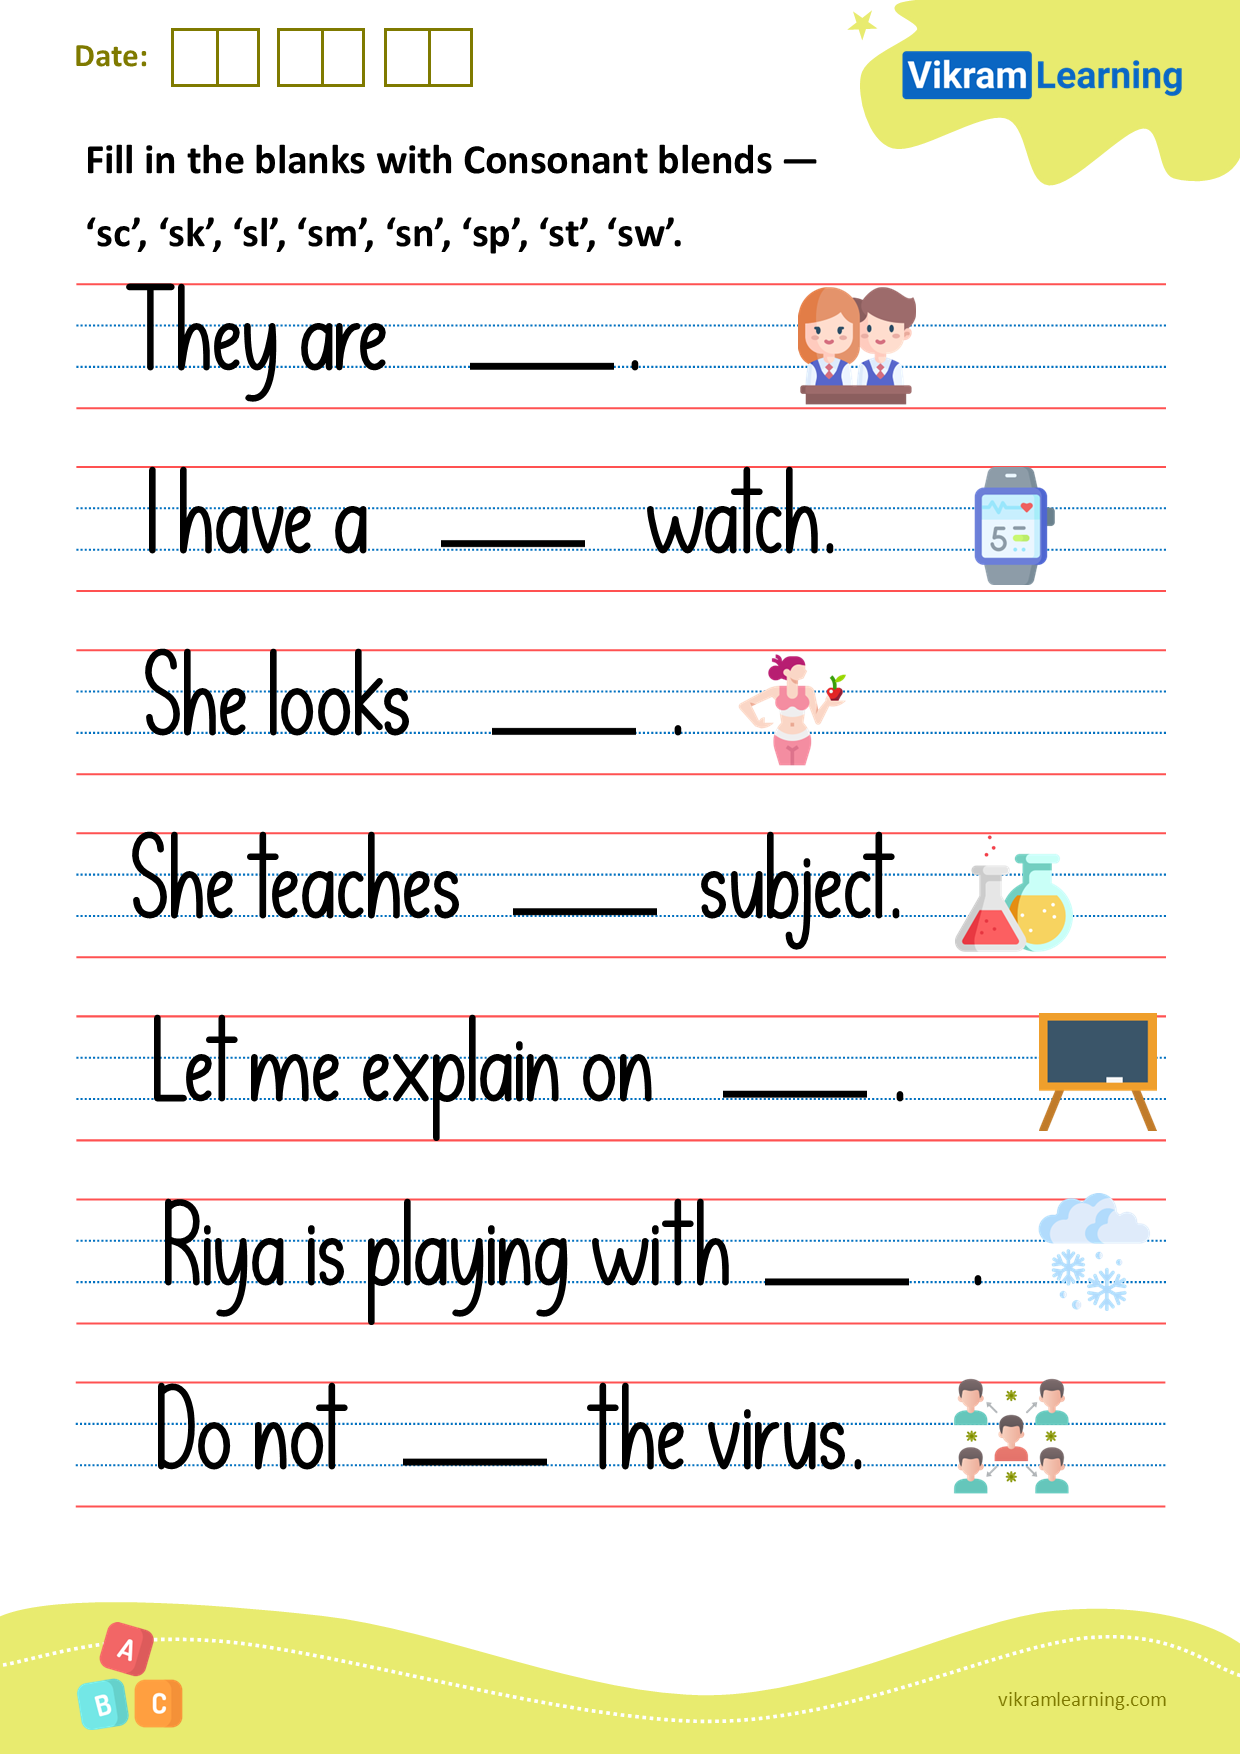 Download fill in the blanks with consonant blends — ‘sc’, ‘sk’, ‘sl’, ‘sm’, ‘sn’, ‘sp’, ‘st’, ‘sw’ worksheets